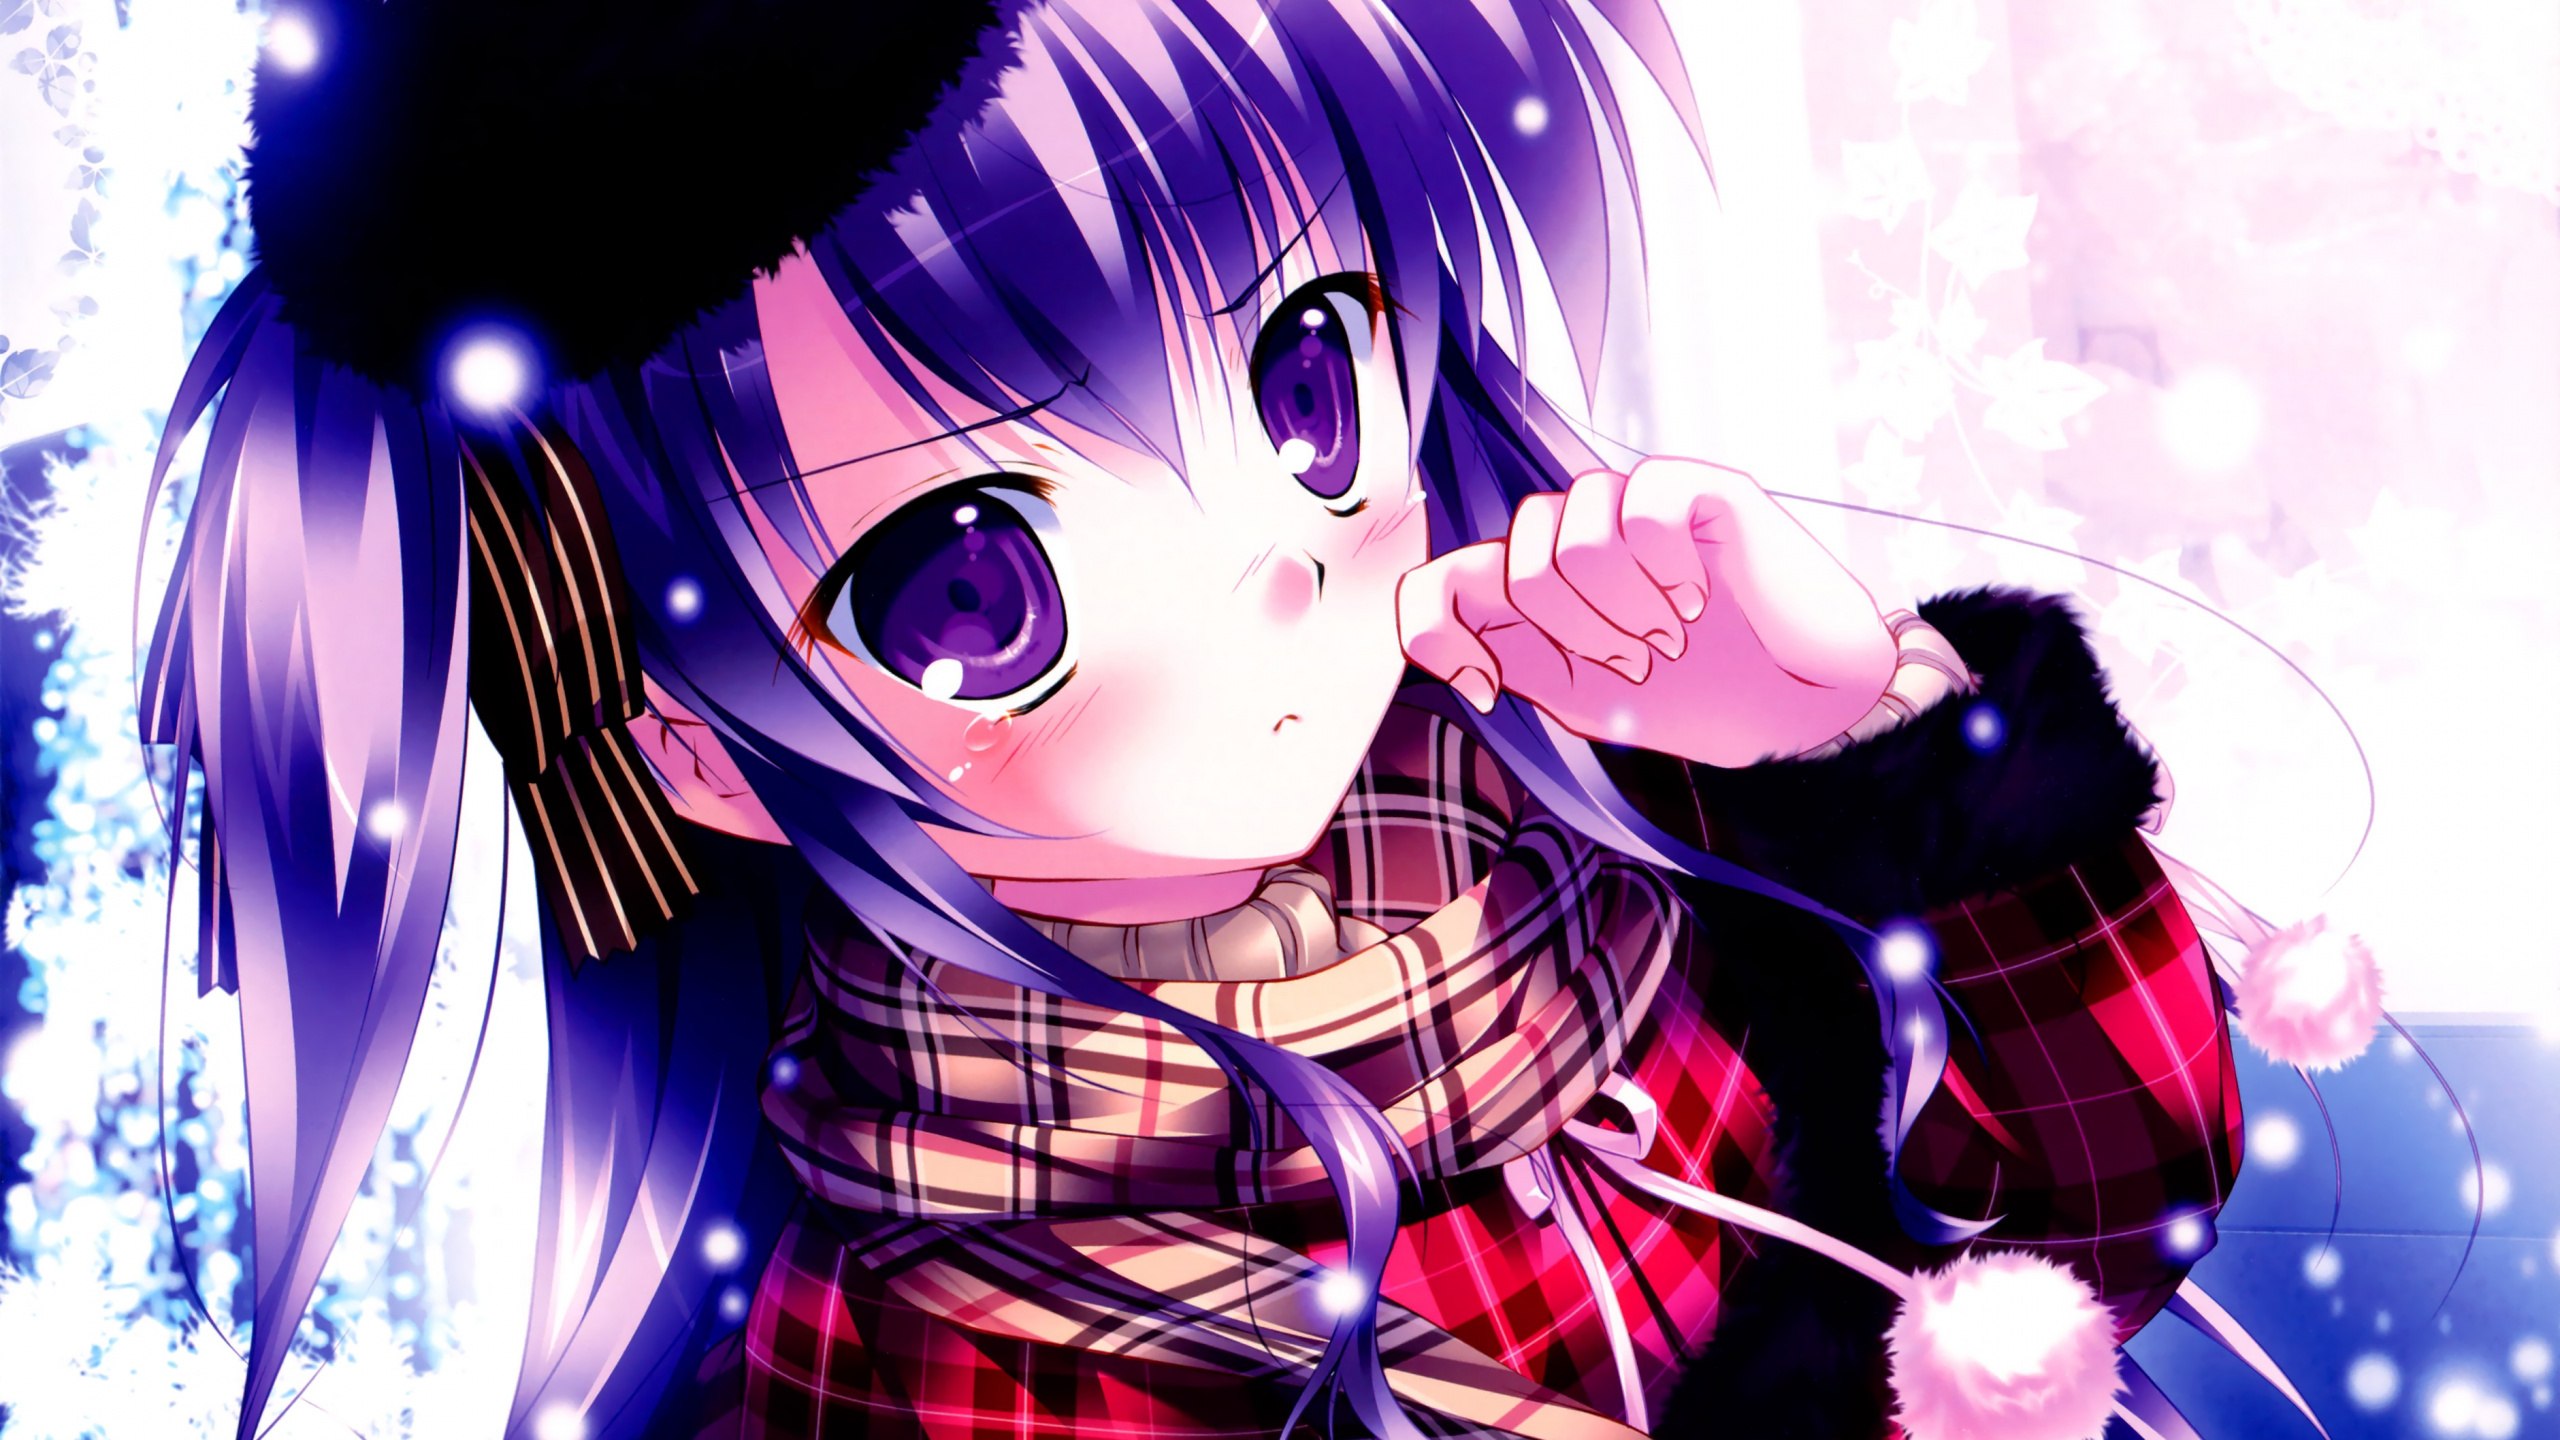 Purple Haired Girl Anime Character. Wallpaper in 2560x1440 Resolution